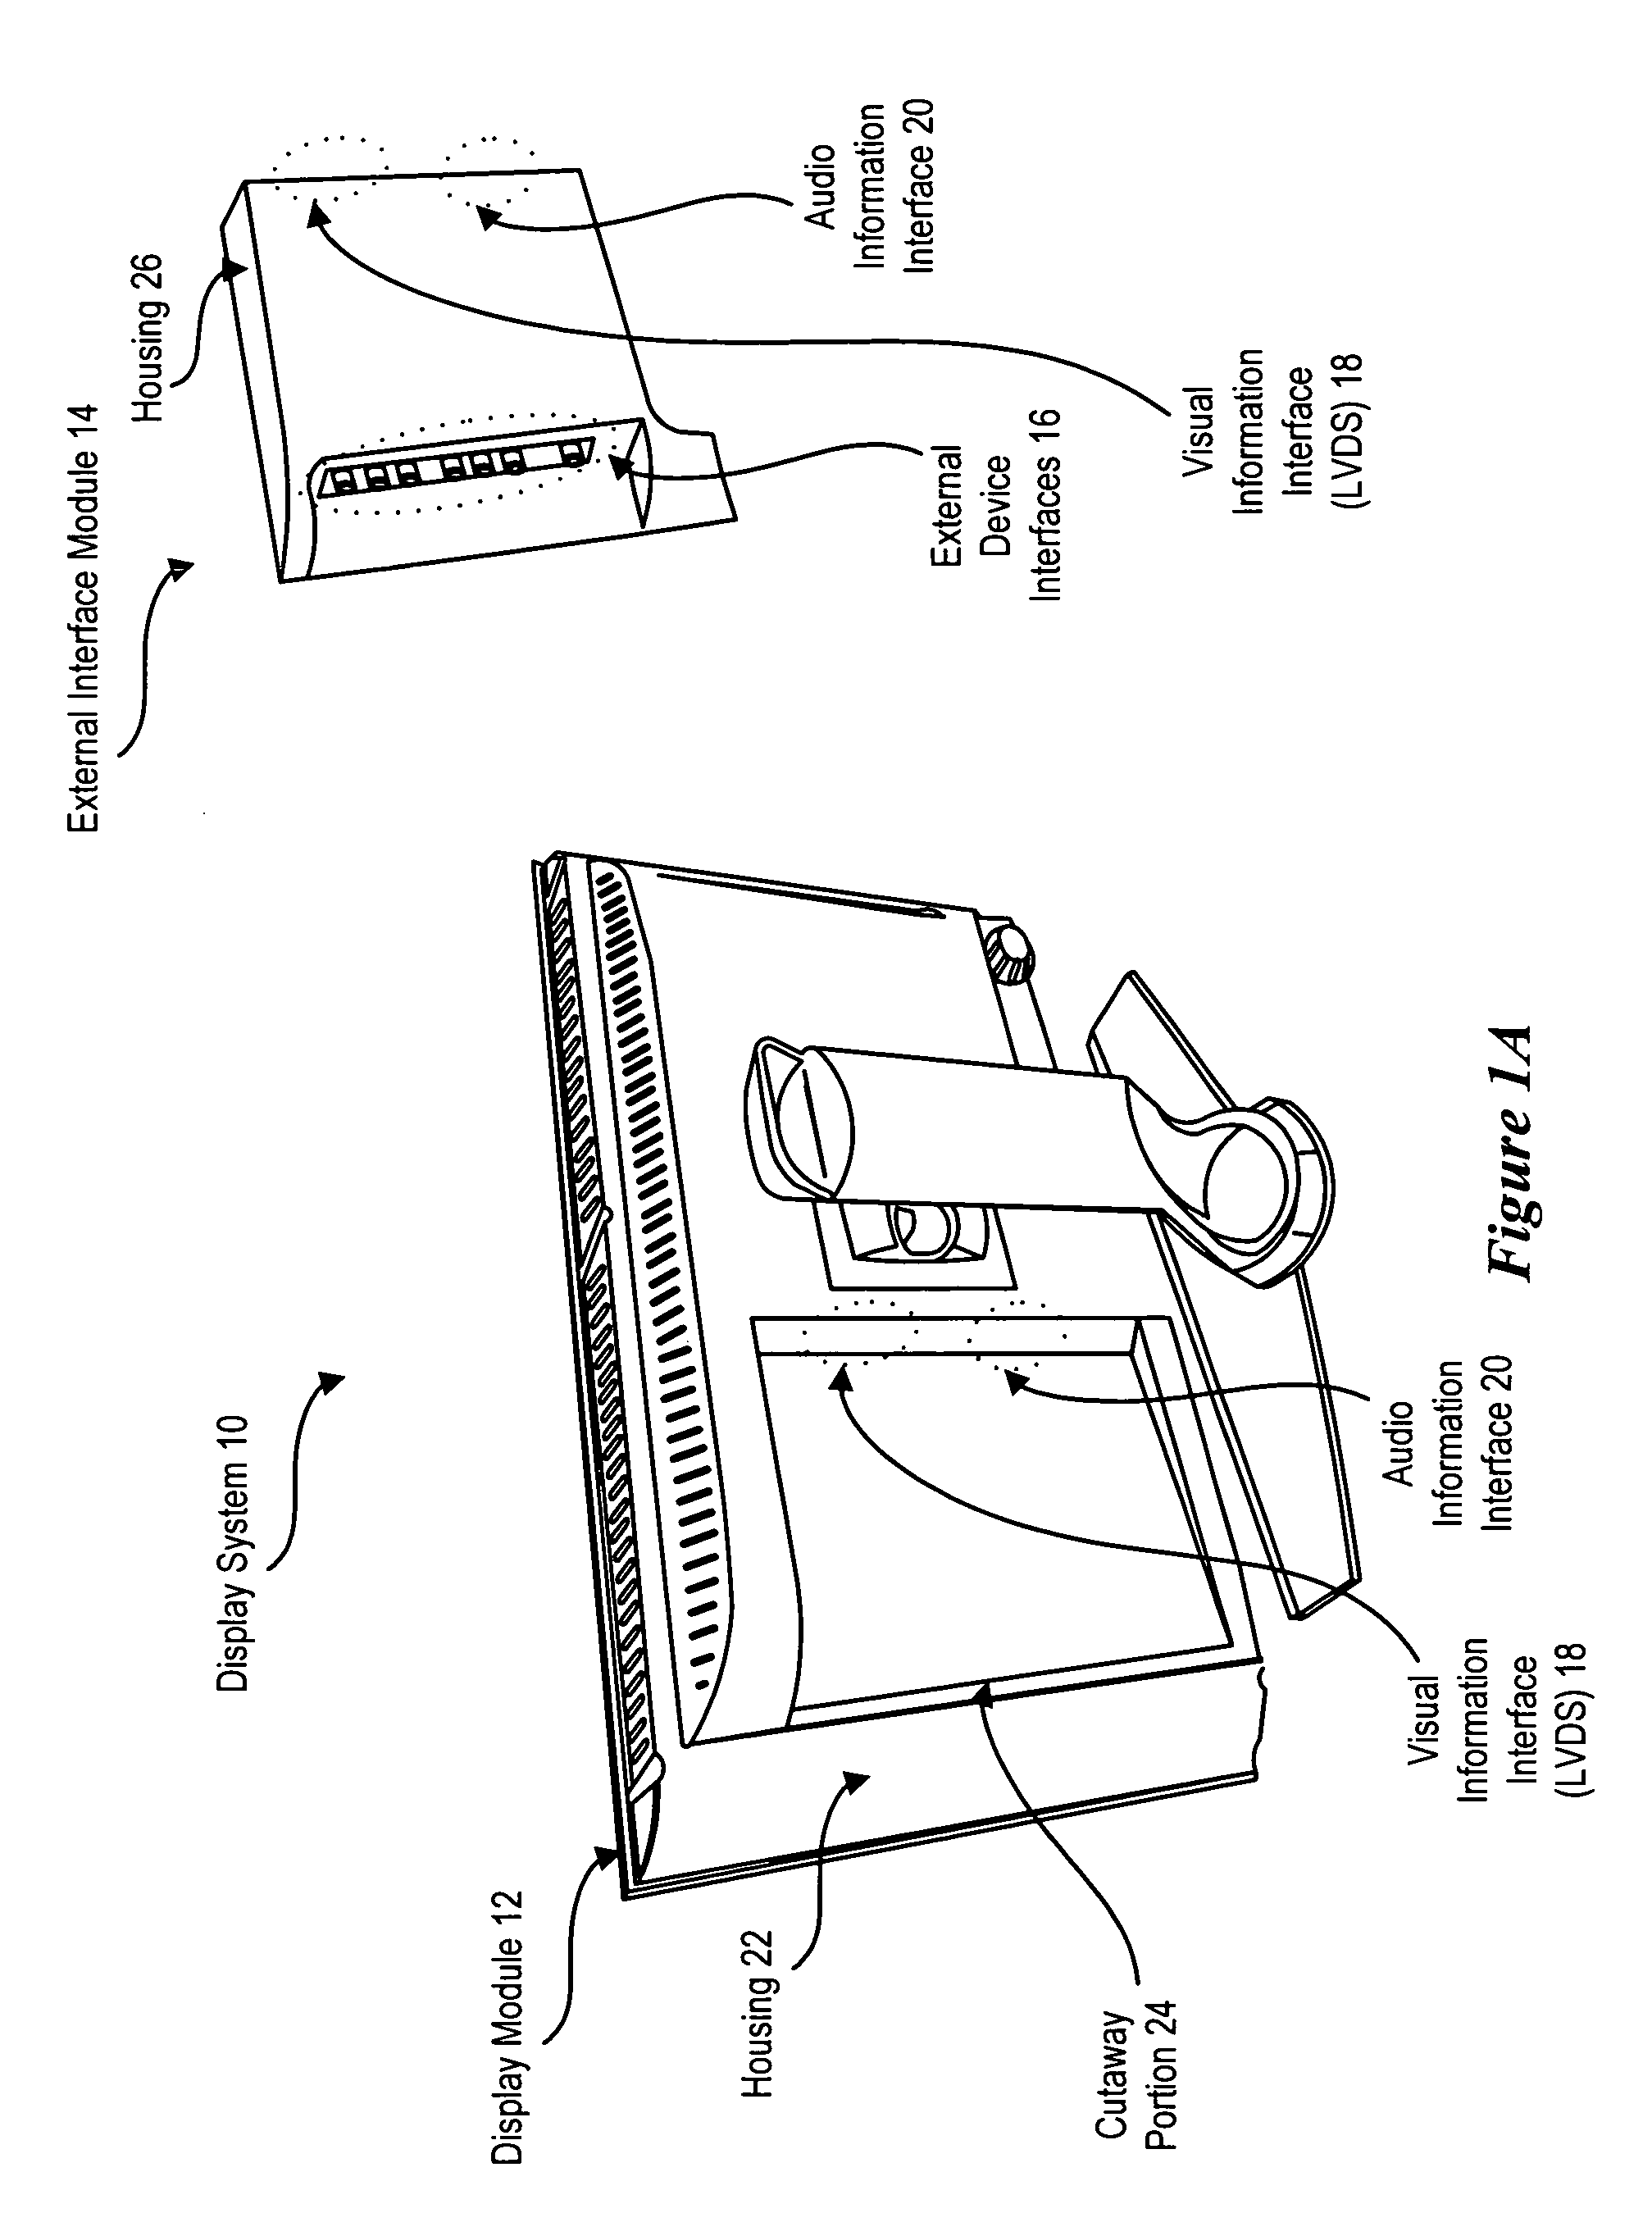 System and method for modular display